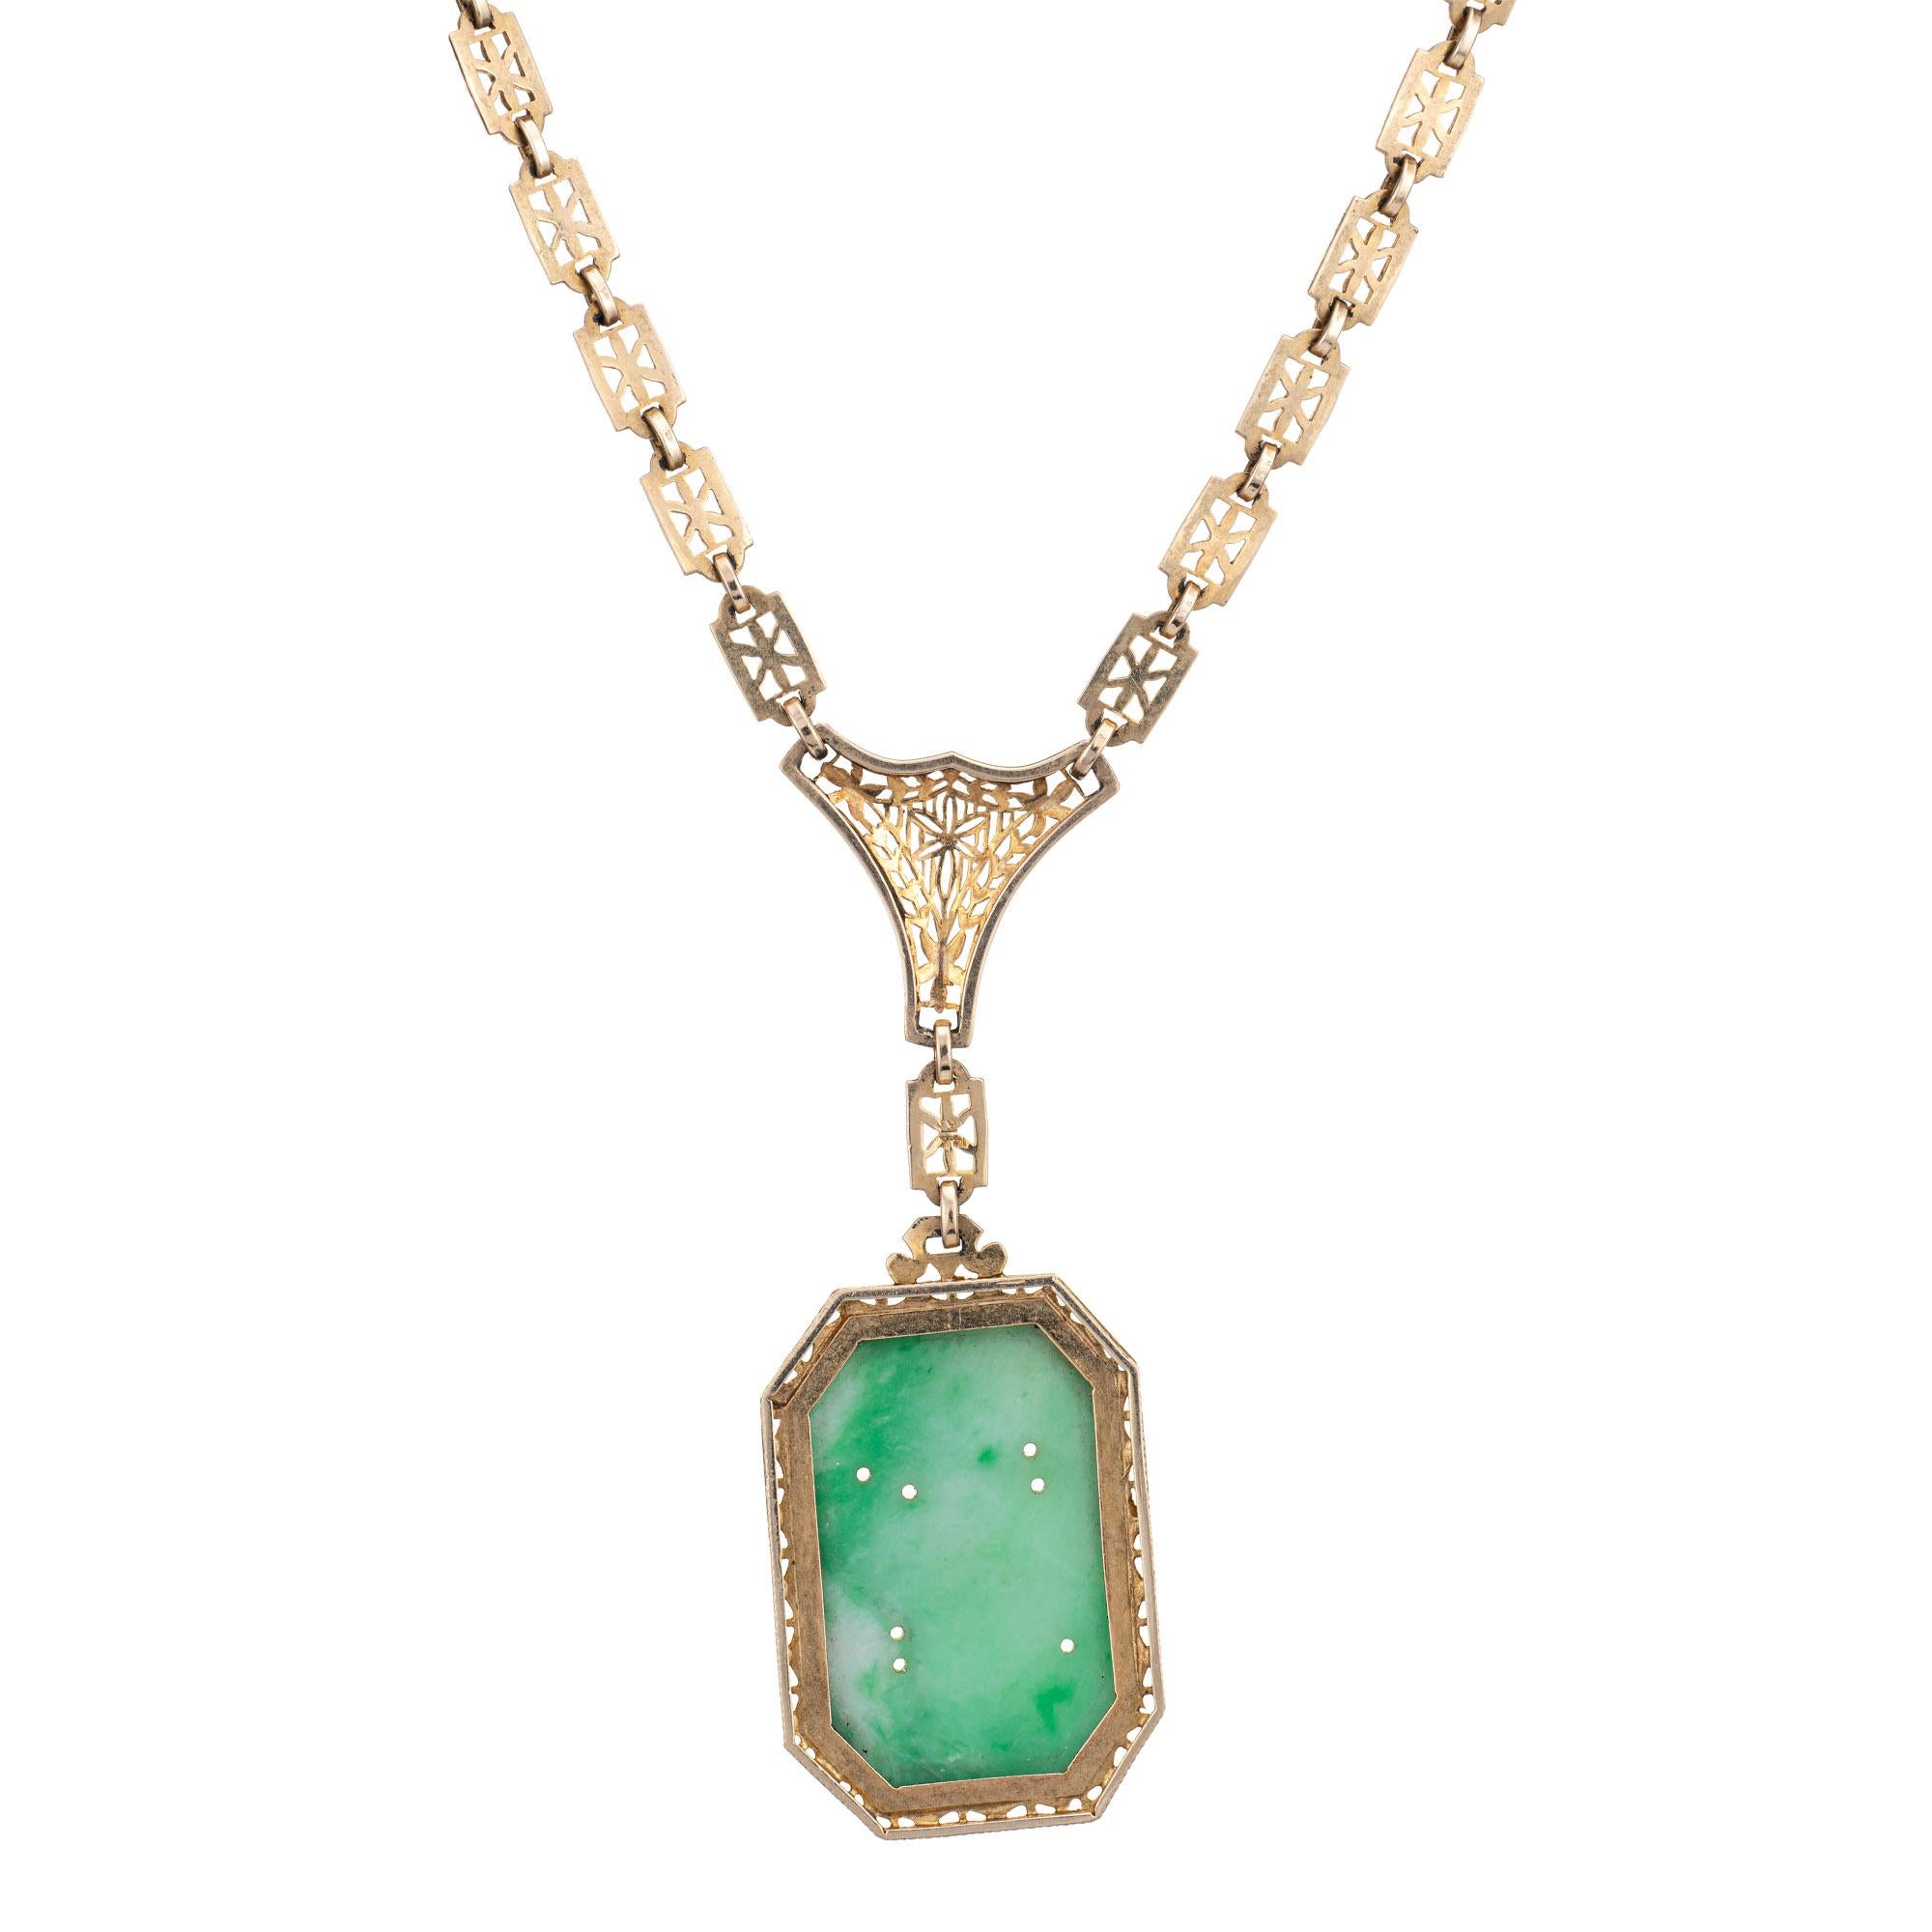 Finely detailed vintage Art Deco drop necklace (circa 1920s to 1930s), crafted in 14 karat yellow gold. 

The drop is set with carved jade measuring an25mm x 17mm. The jade is in very good condition and free of cracks or chips. 

The die-struck